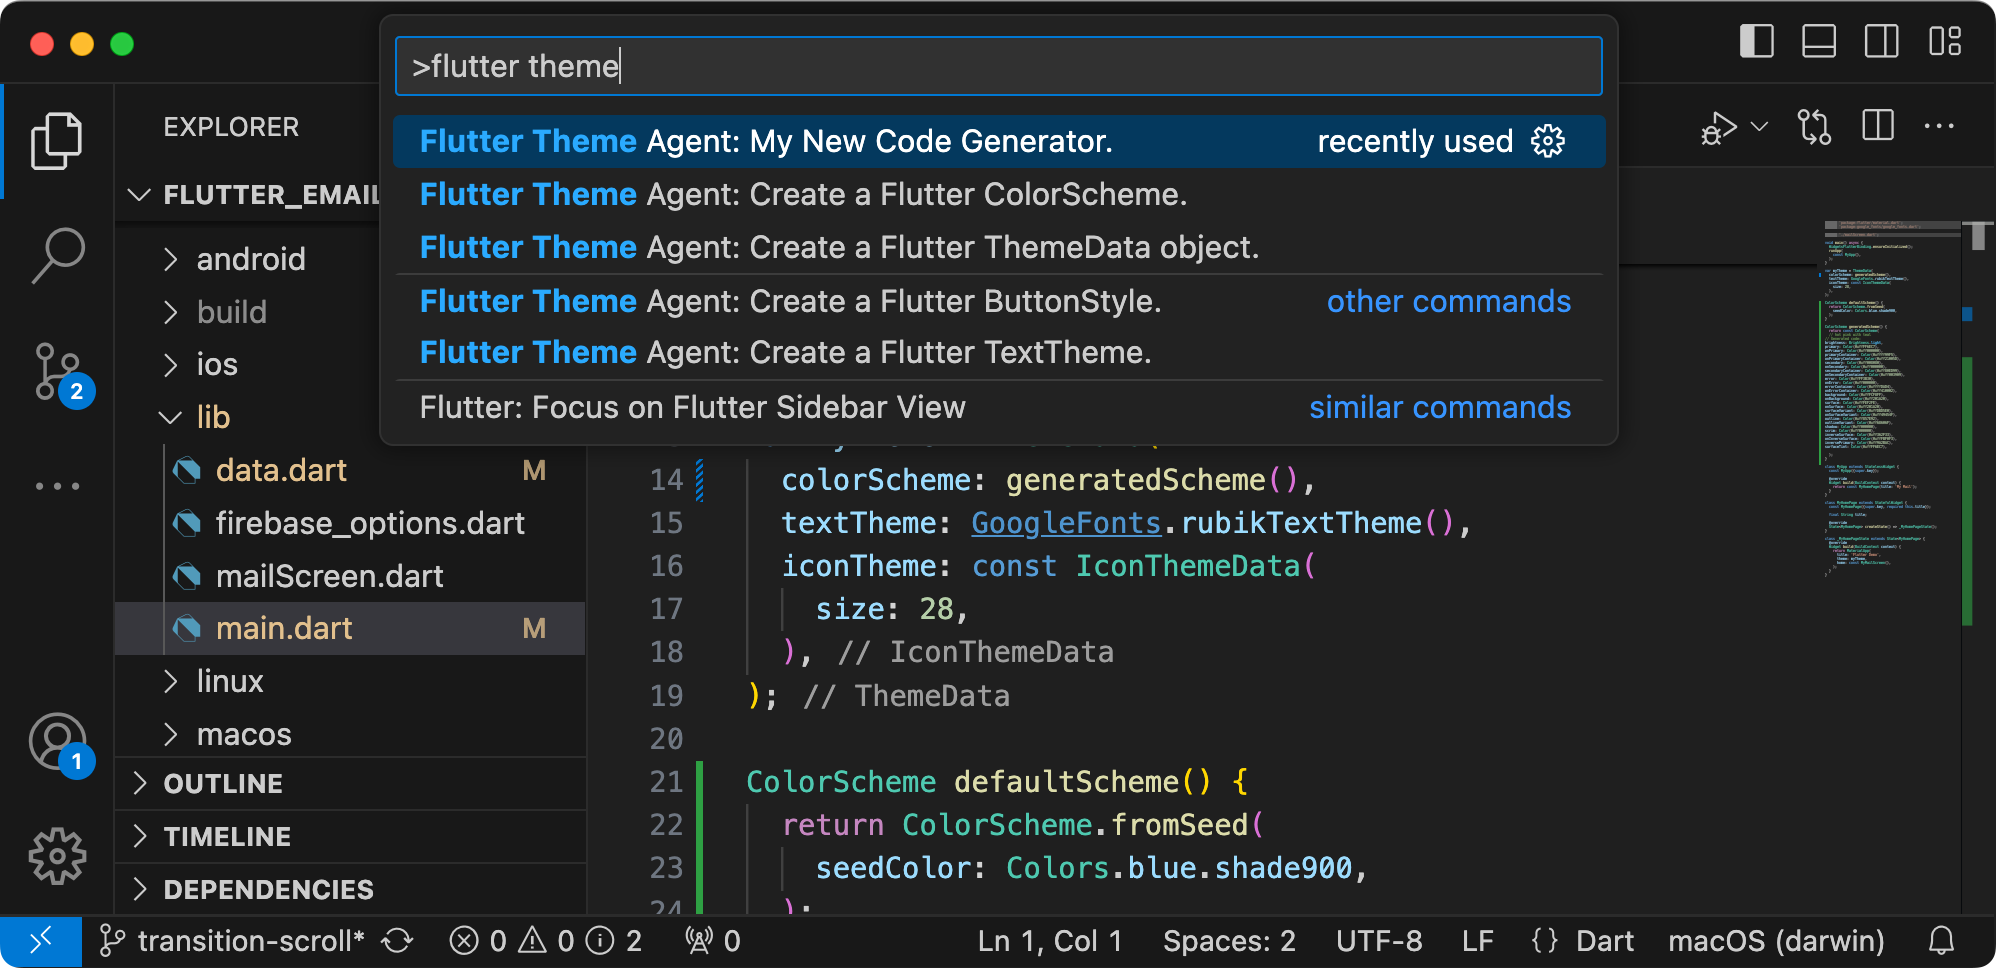 Screenshot of Flutter Theme Agent with new command visible